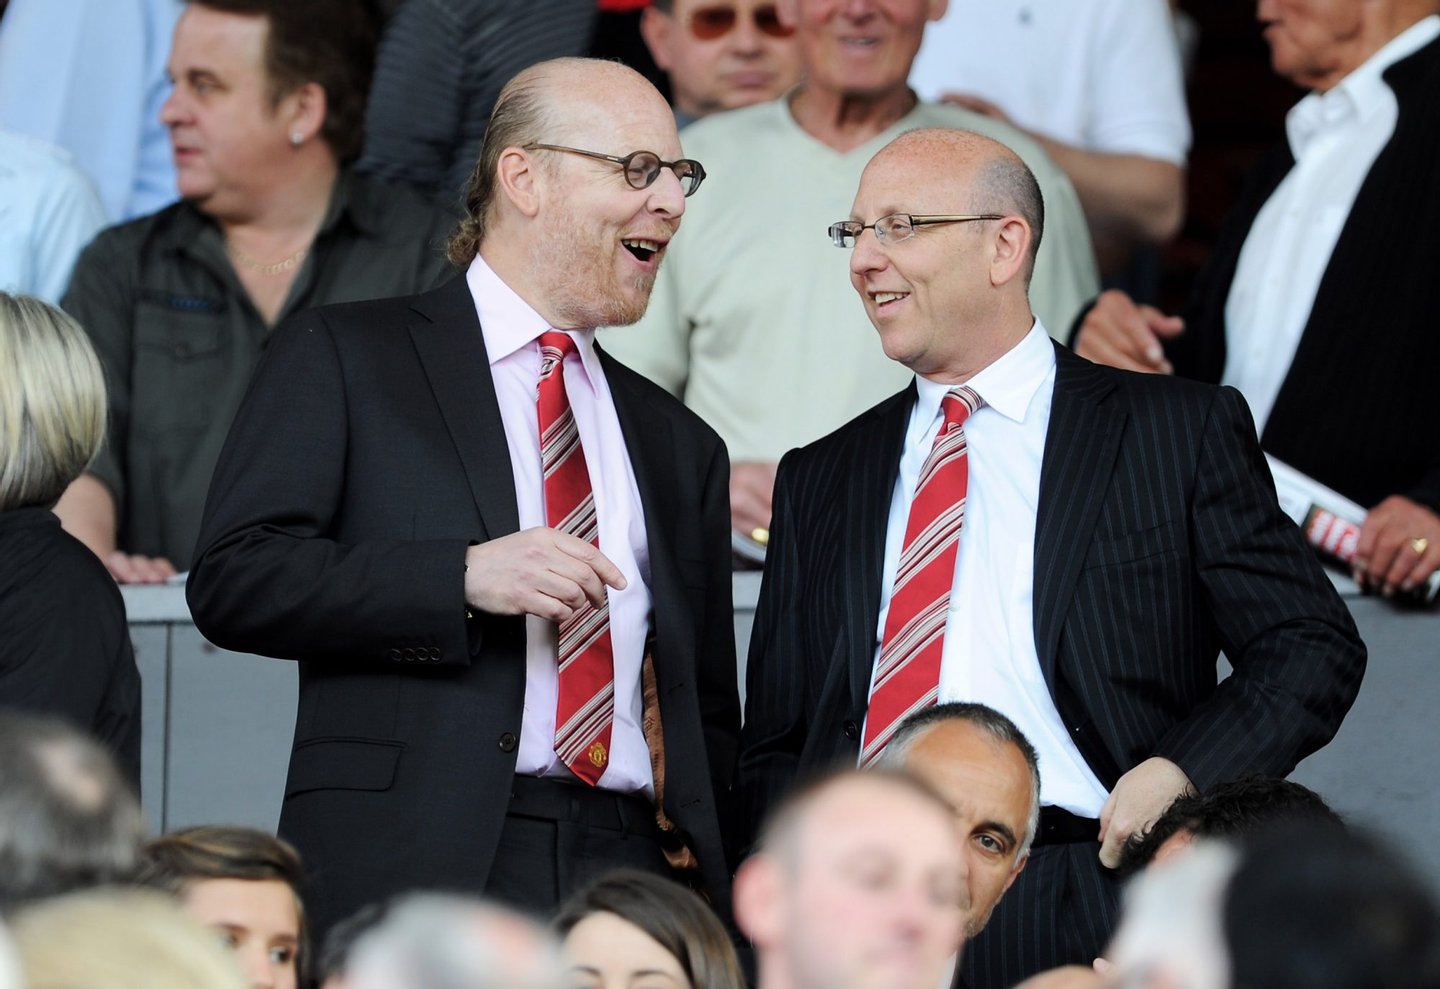 MANCHESTER, ENGLAND - APRIL 09: Manchester United Co-Chairmen Joel Glazer (R) and Avram Glazer talk during the Barclays Premier League match between Manchester United and Fulham at Old Trafford on April 9, 2011 in Manchester, England. (Photo by Michael Regan/Getty Images)